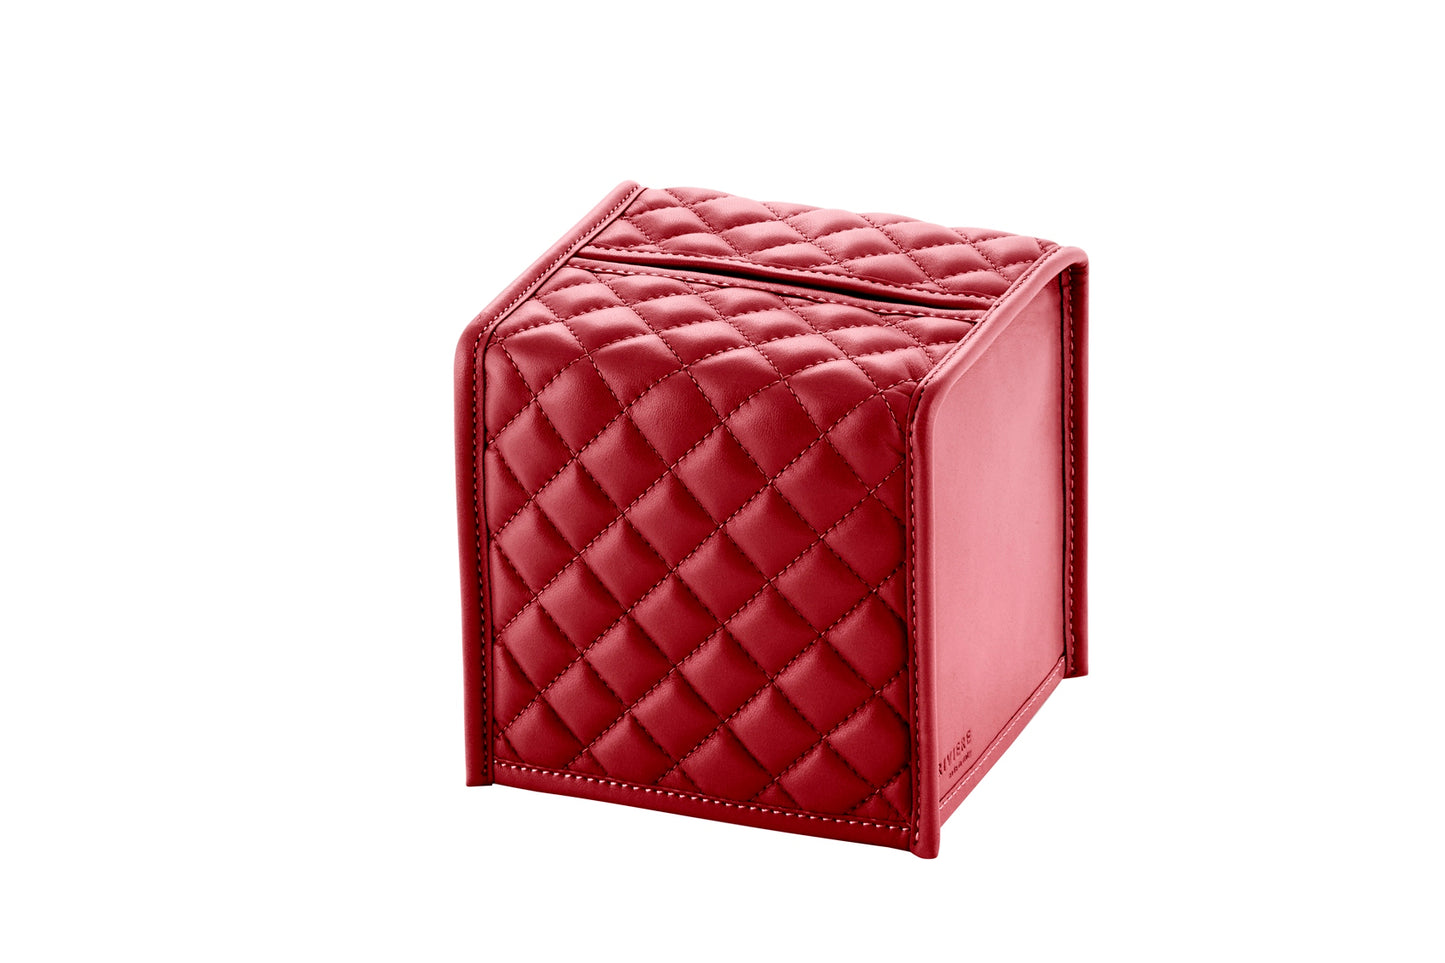 Riviere Elba Quilted Diamonds Leather Tissue Holder | Padded Leather Tissue Box Cover | Elegant Quilted Diamonds Design | Explore a Range of Luxury Home Accessories and Yacht Decor at 2Jour Concierge, #1 luxury high-end gift & lifestyle shop